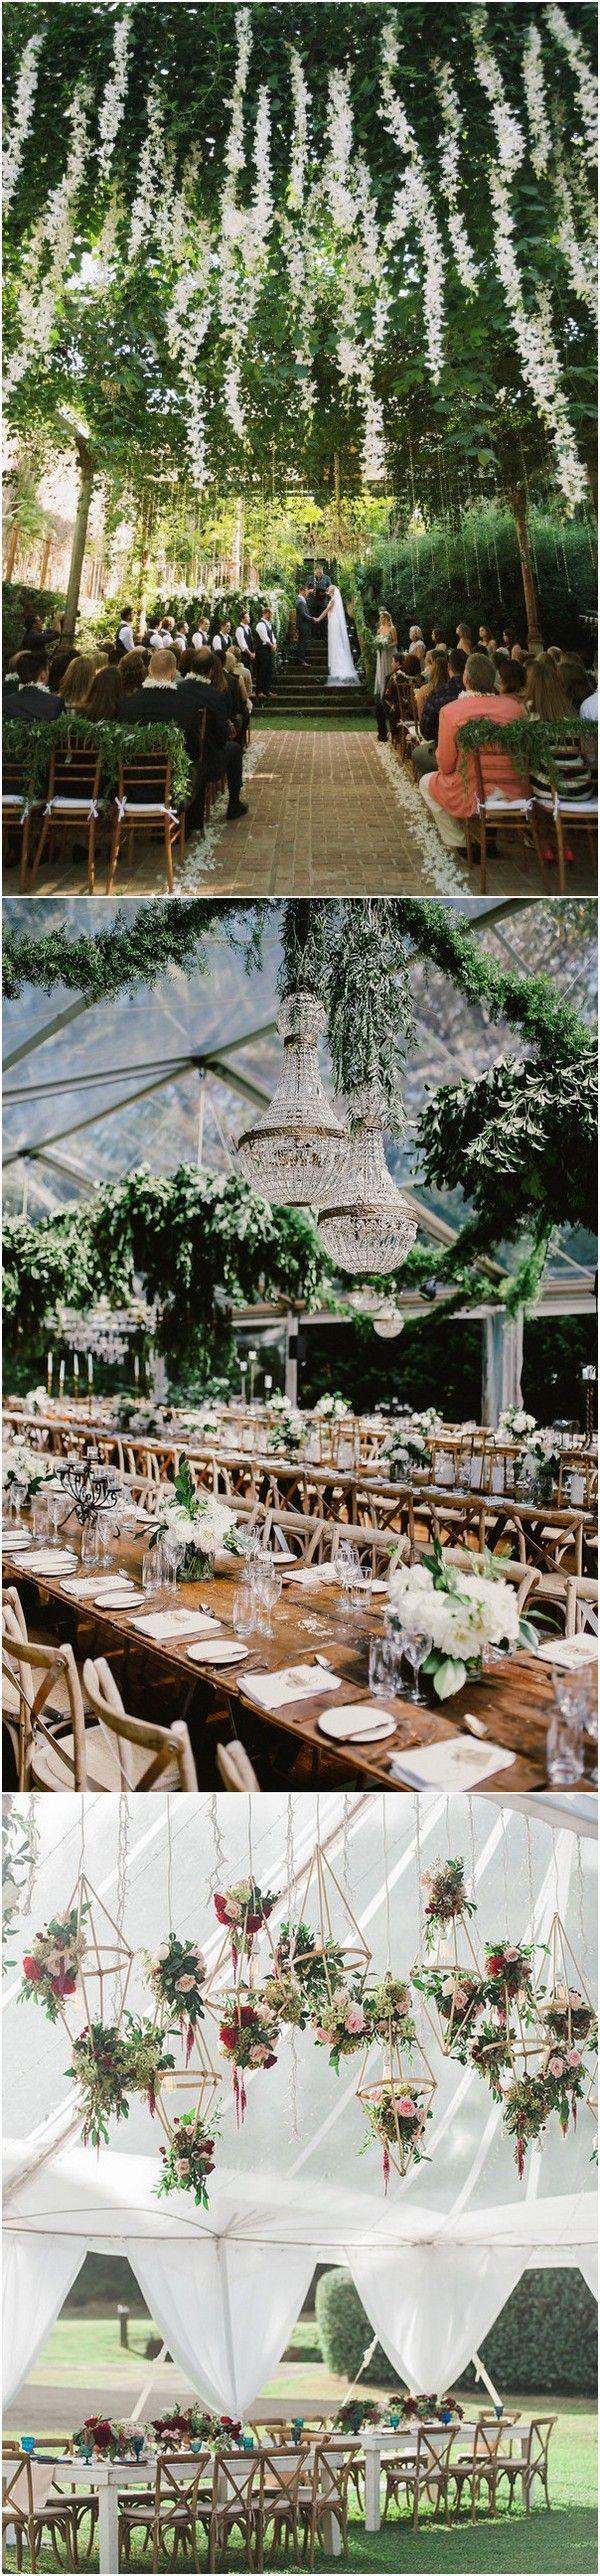 Hochzeit - Trending-12 Fairytale Wedding Flower Ceiling Ideas For Your Big Day - Page 2 Of 2